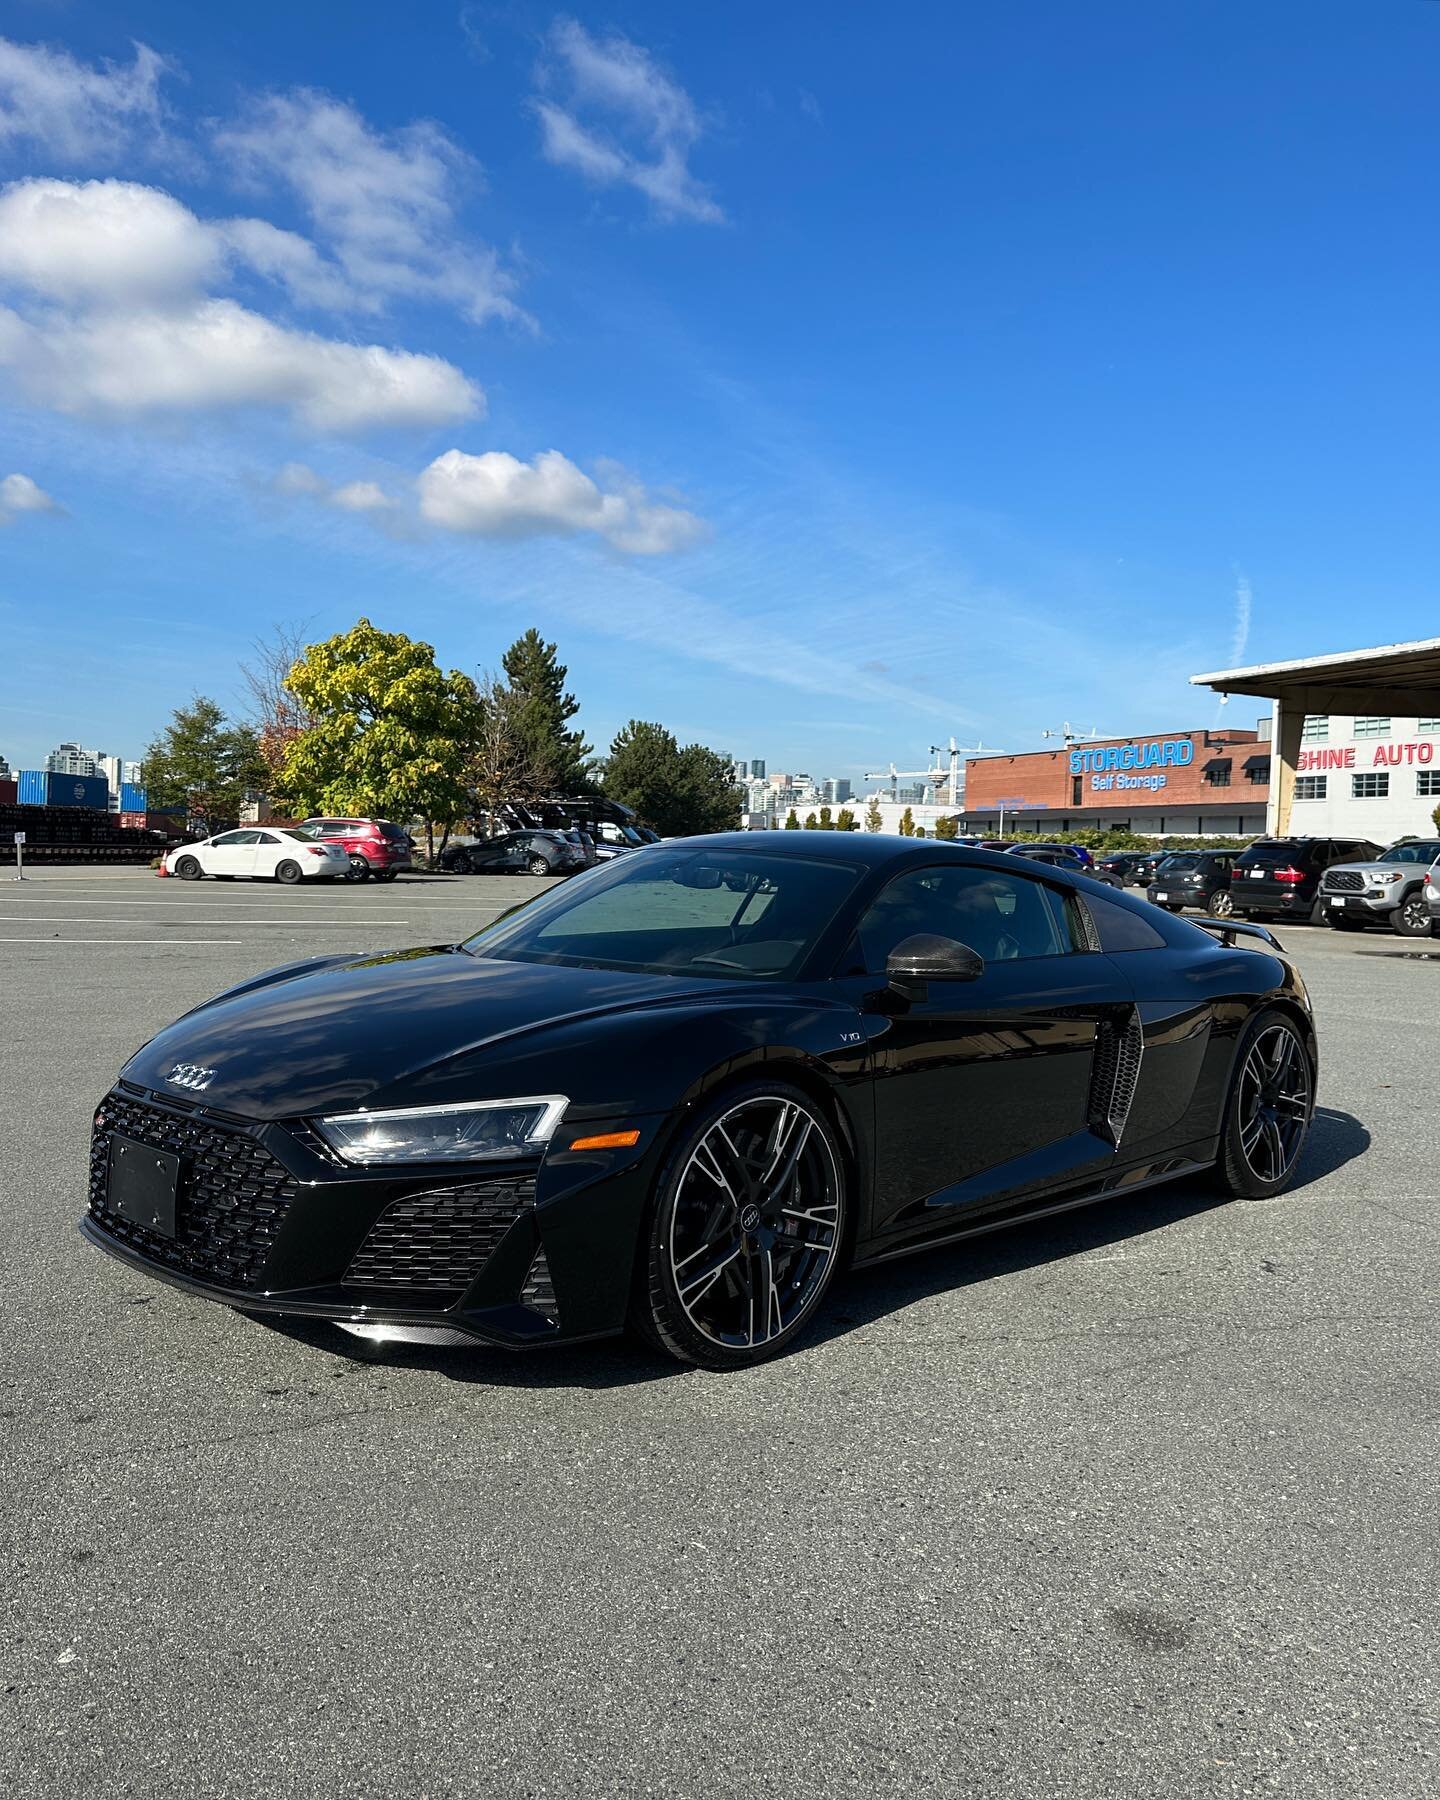 Audi R8 V10

Came in for our Signature Silver Package ✅

After a thorough clean this stunning R8 was prepped and ready for sale☺️

For inquiries or bookings

Phone: 604-404-7225
Email: Washiewashiedetailing@gmail.com
Website: Washiewashie.ca